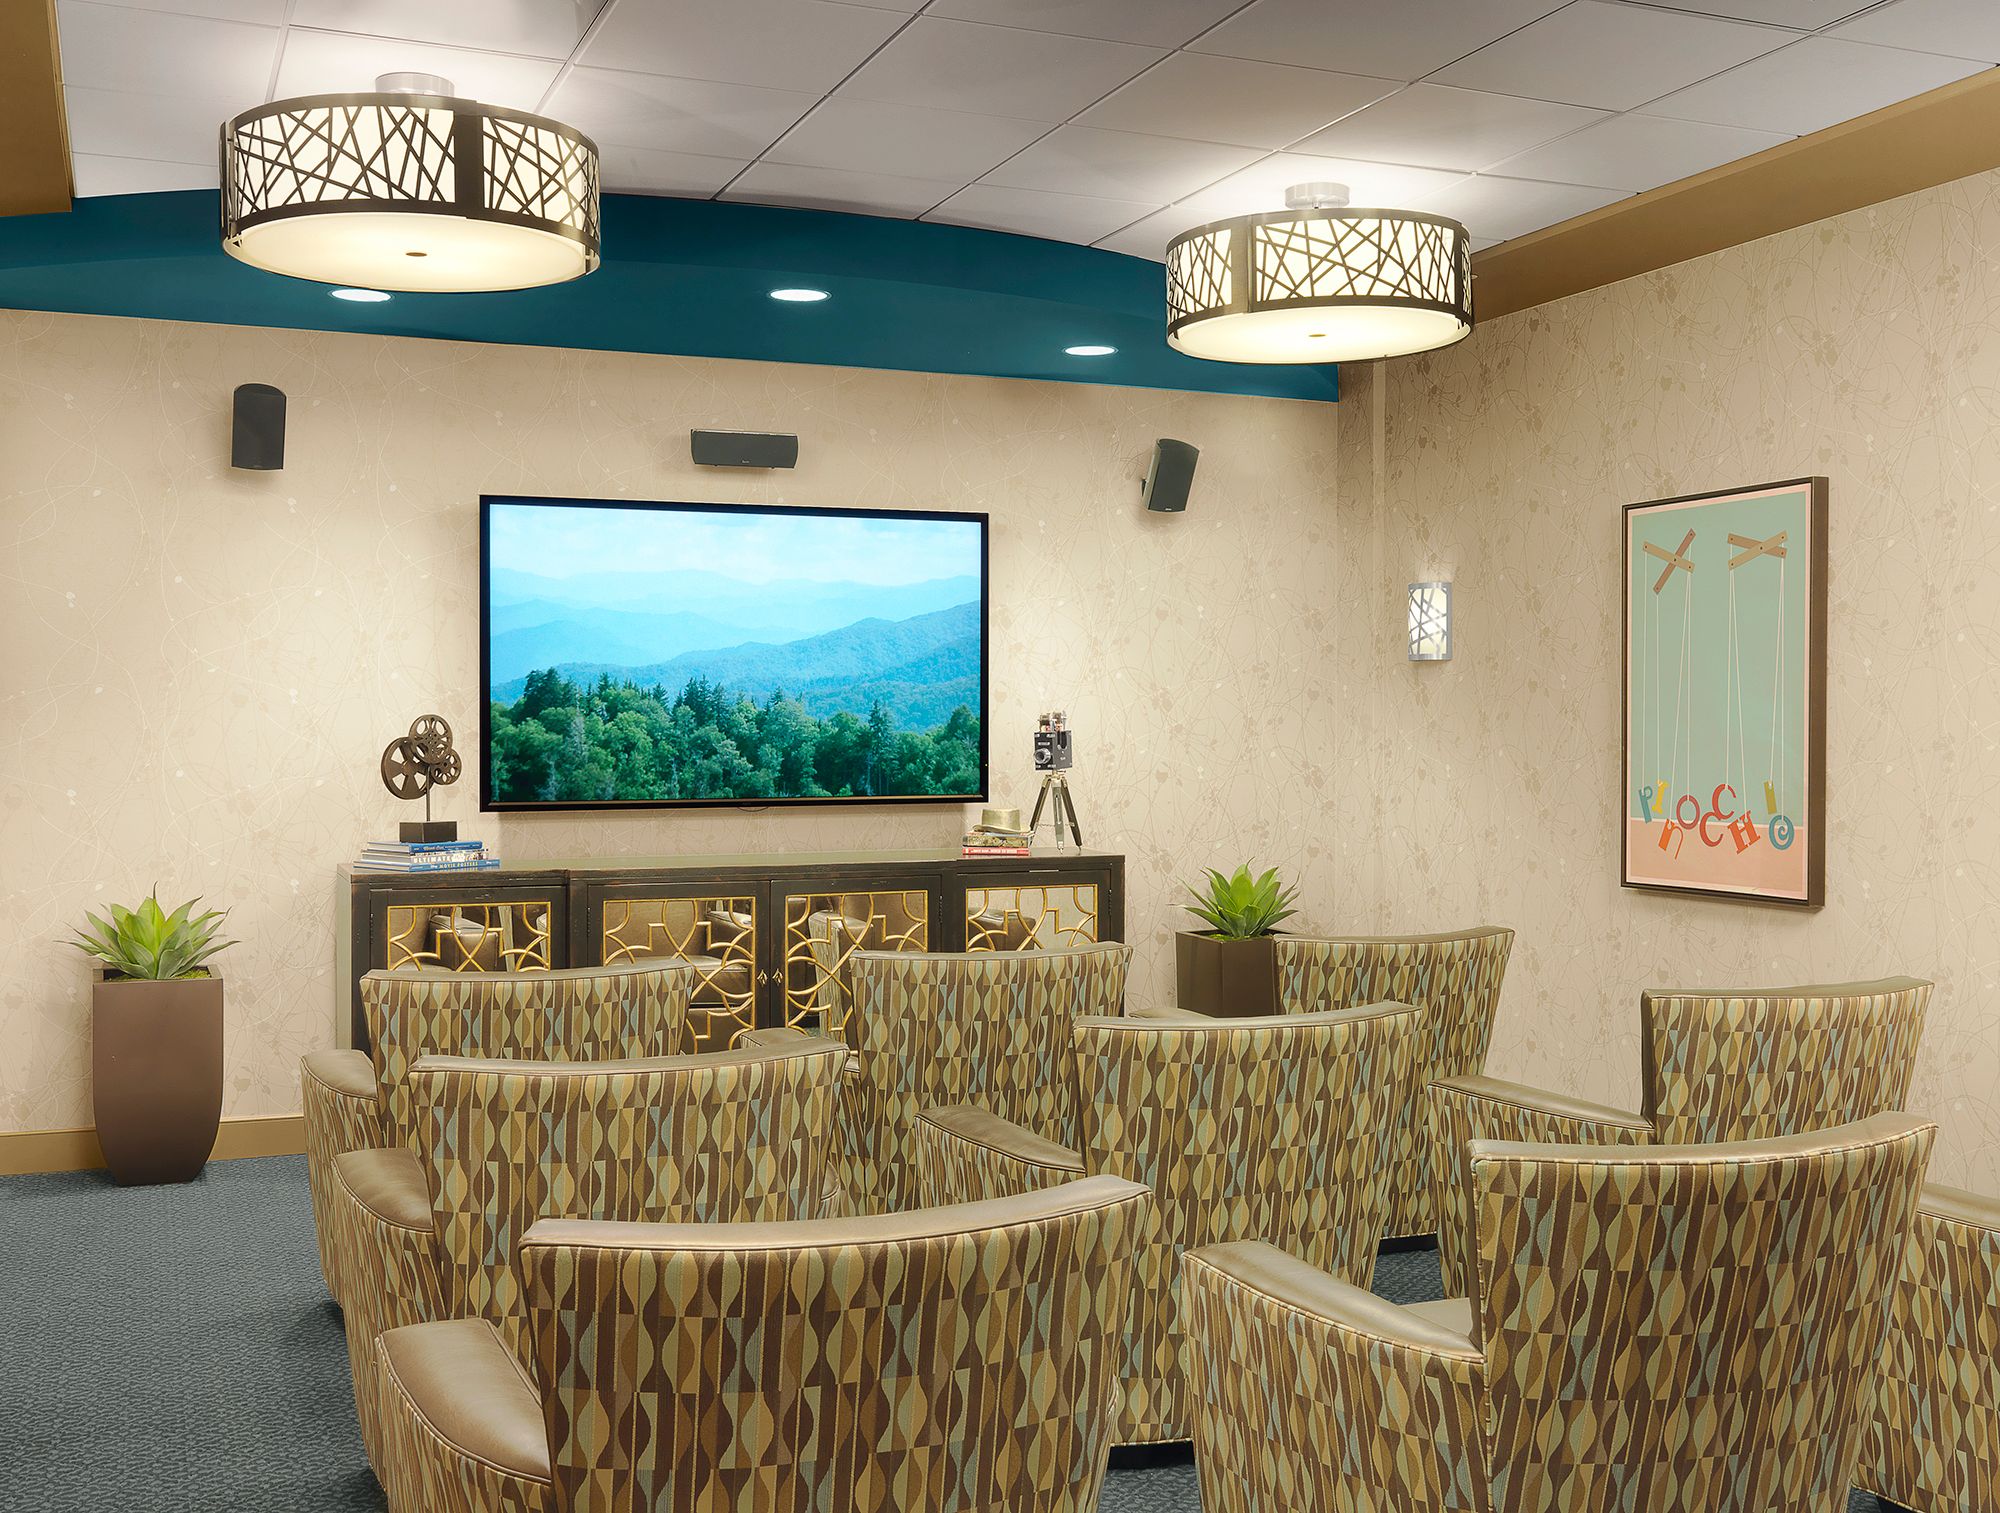 Interior view of Kingswood senior living community featuring lounge, reception area, and modern amenities.